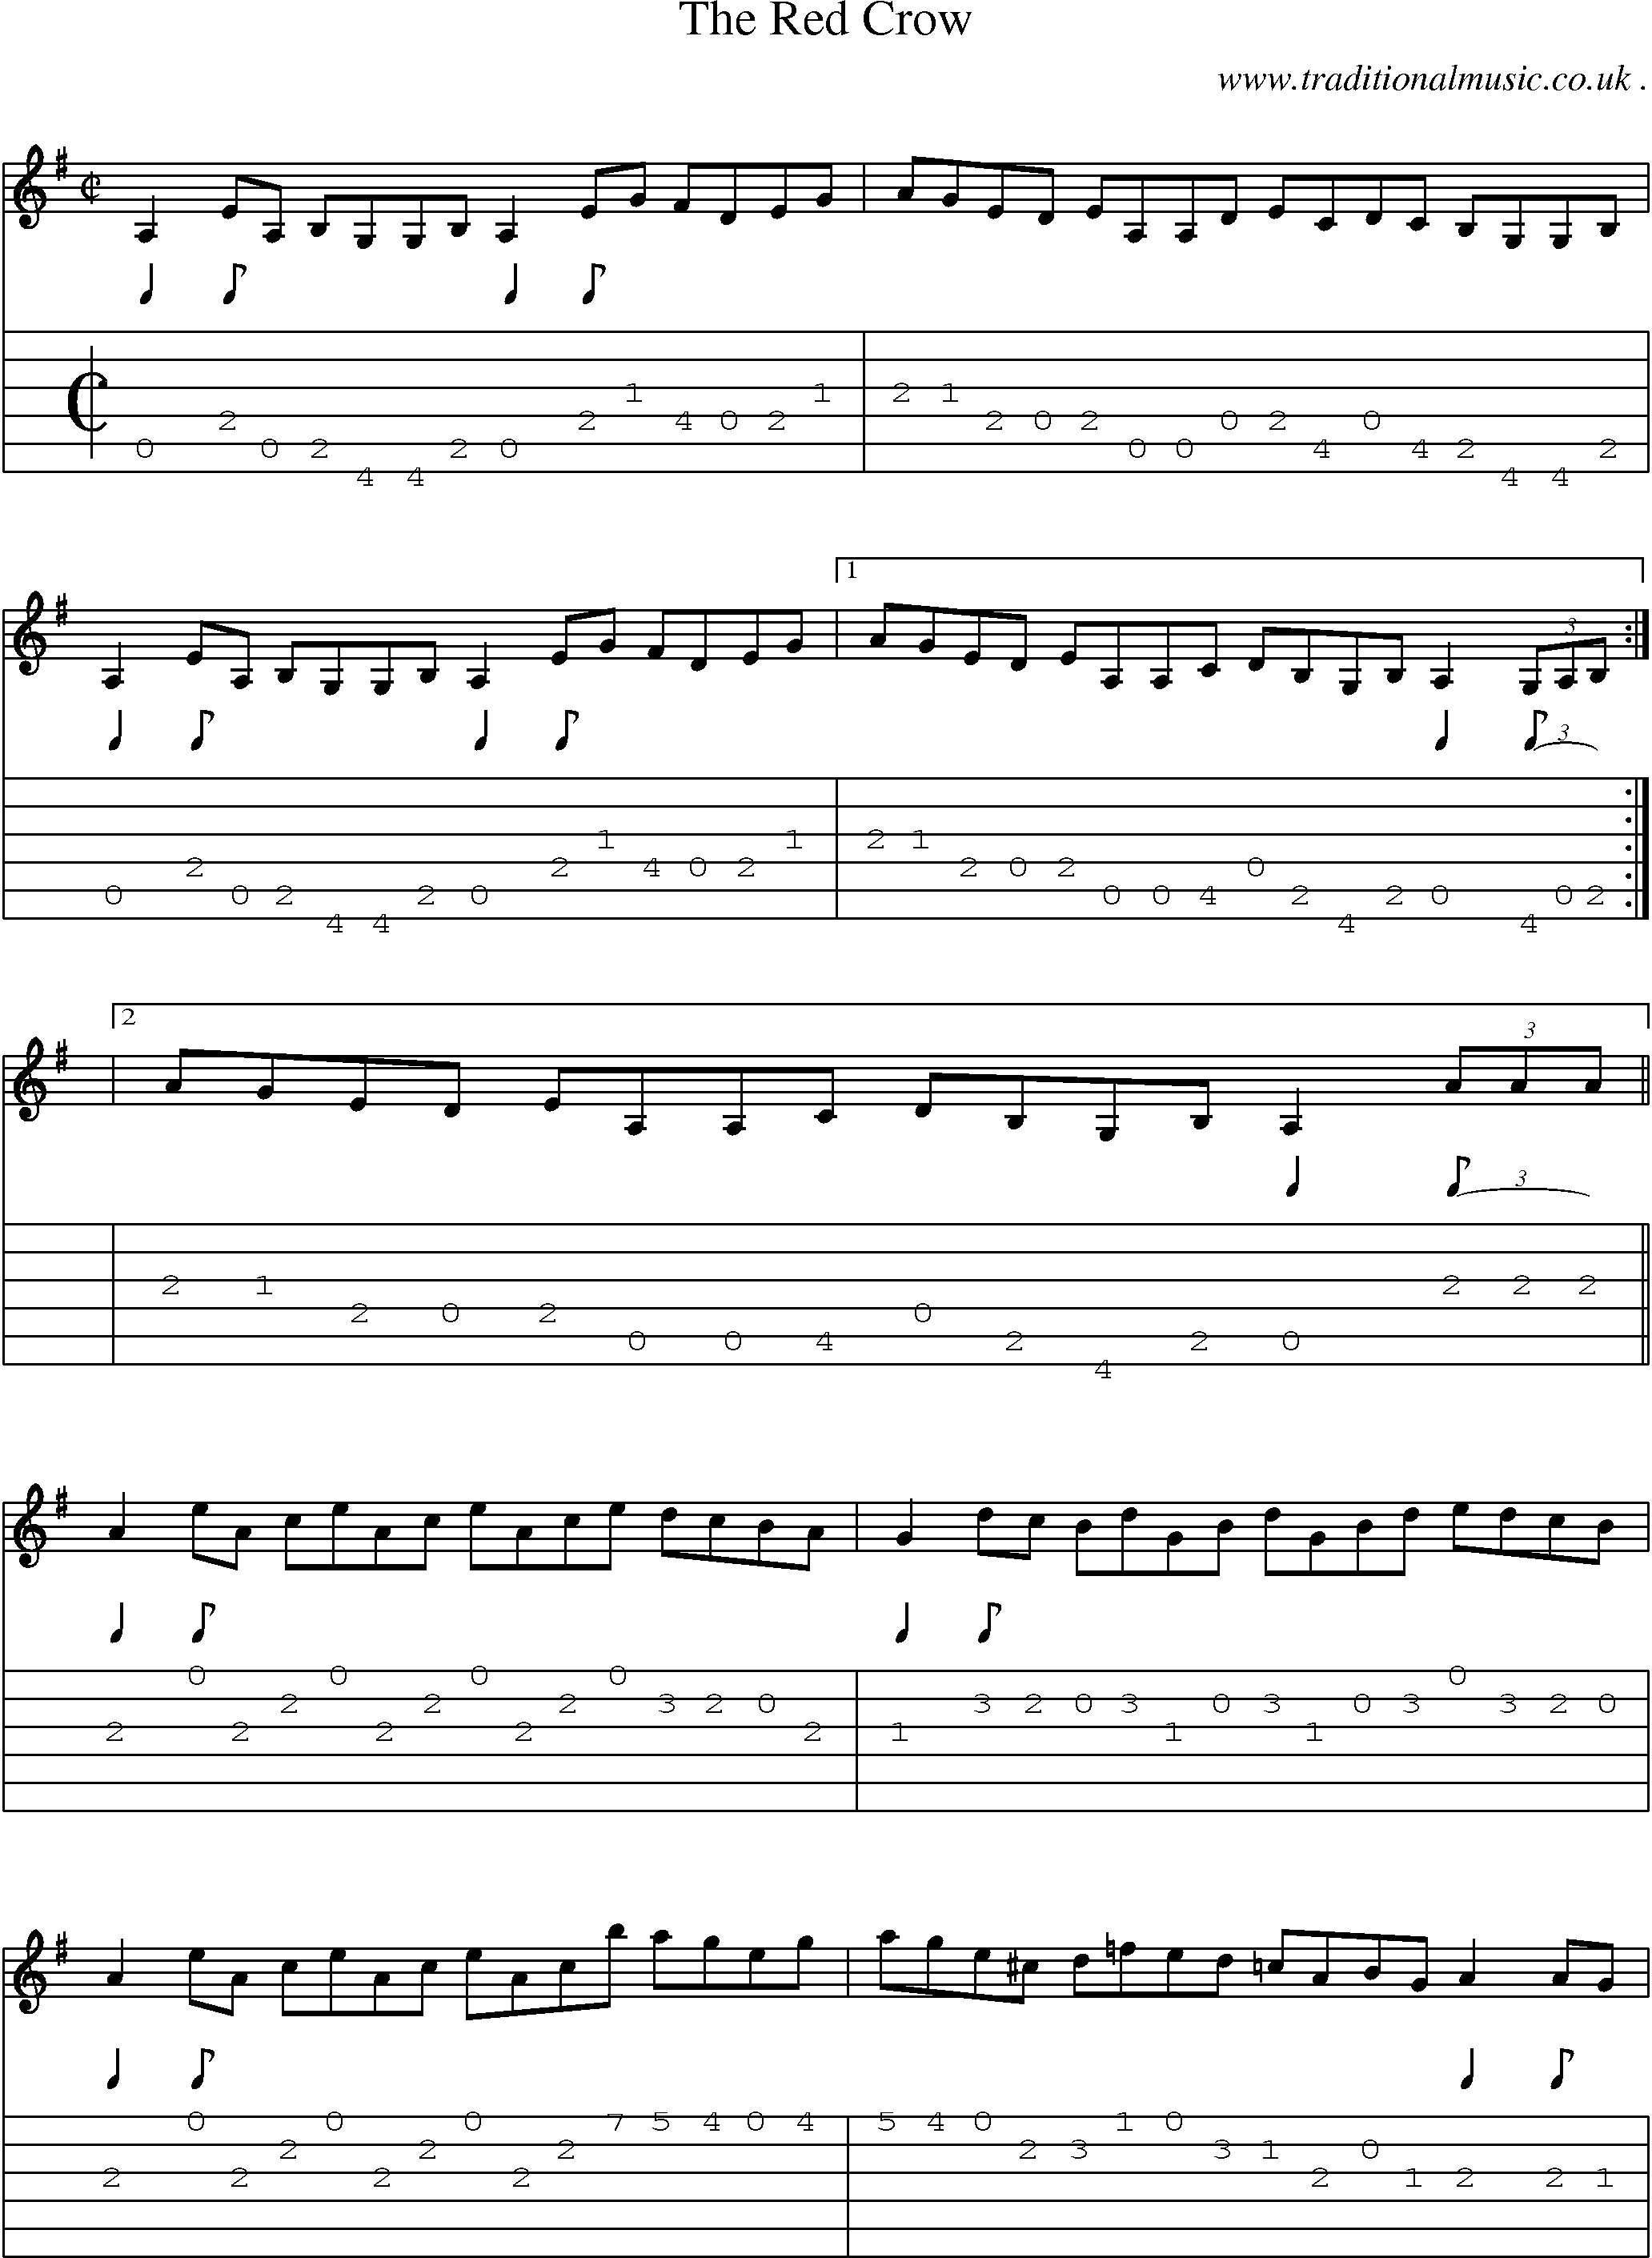 Sheet-Music and Guitar Tabs for The Red Crow